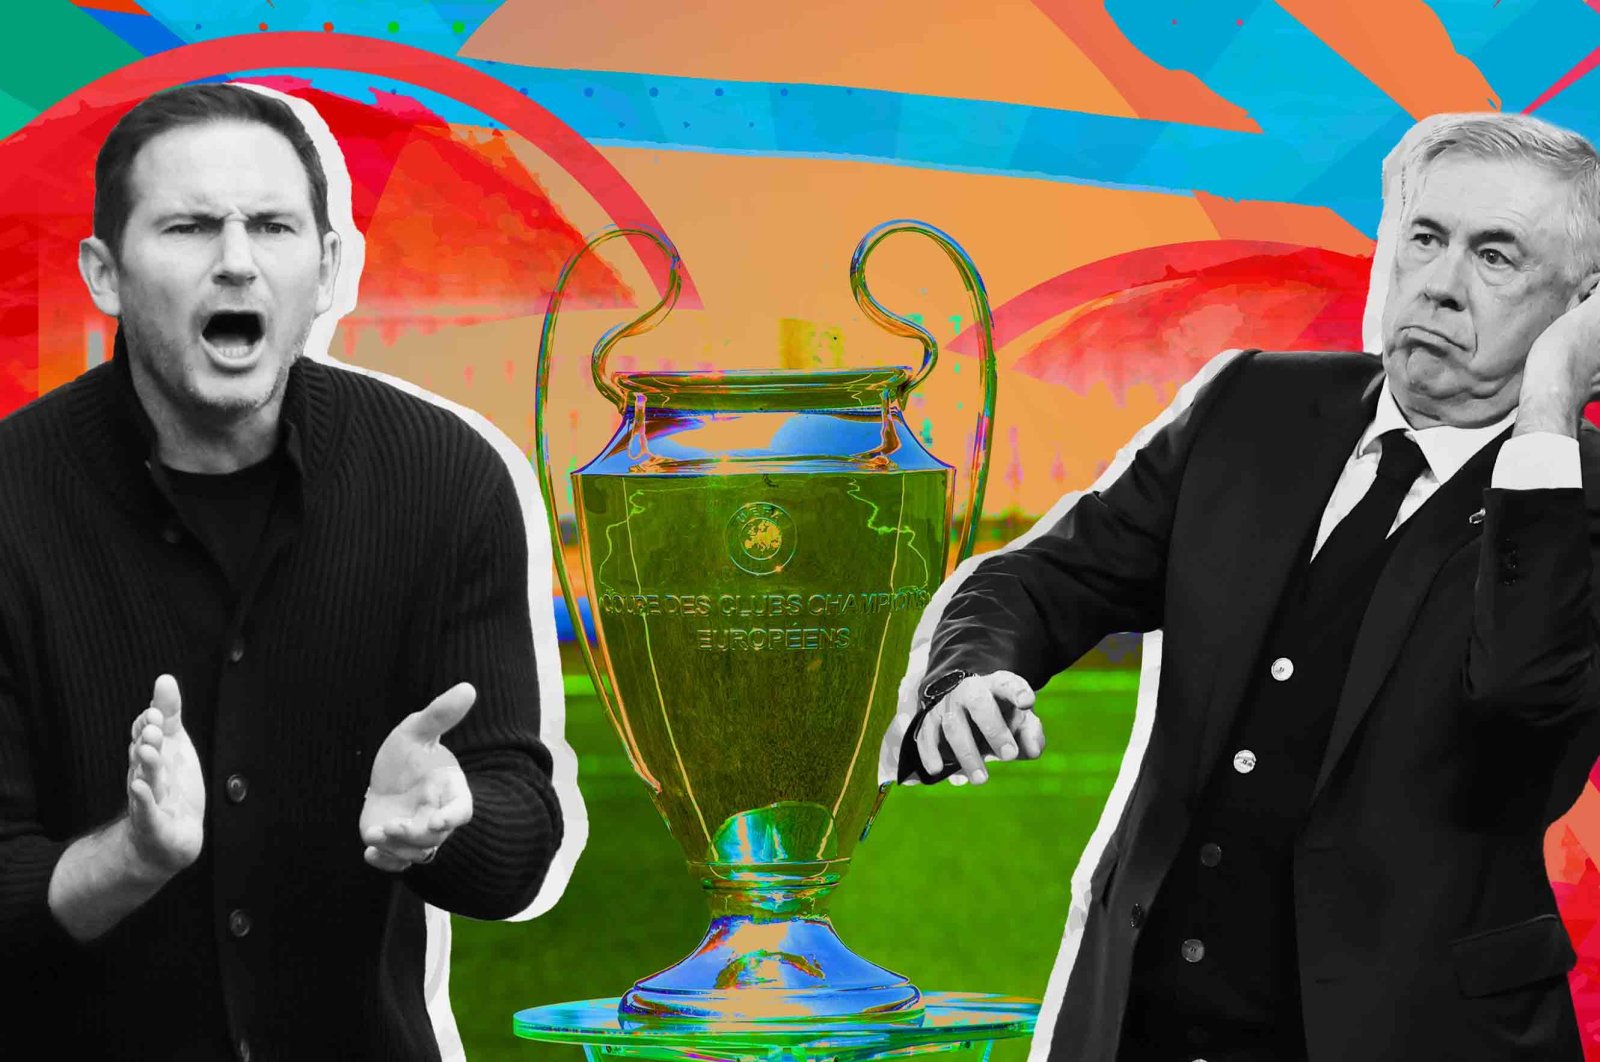 An illustration showing the UEFA Champions League trophy between Real Madrid coach Carlo Ancelotti (R) and Chelsea coach Frank Lampard. (Illustration by Büşra Şen)